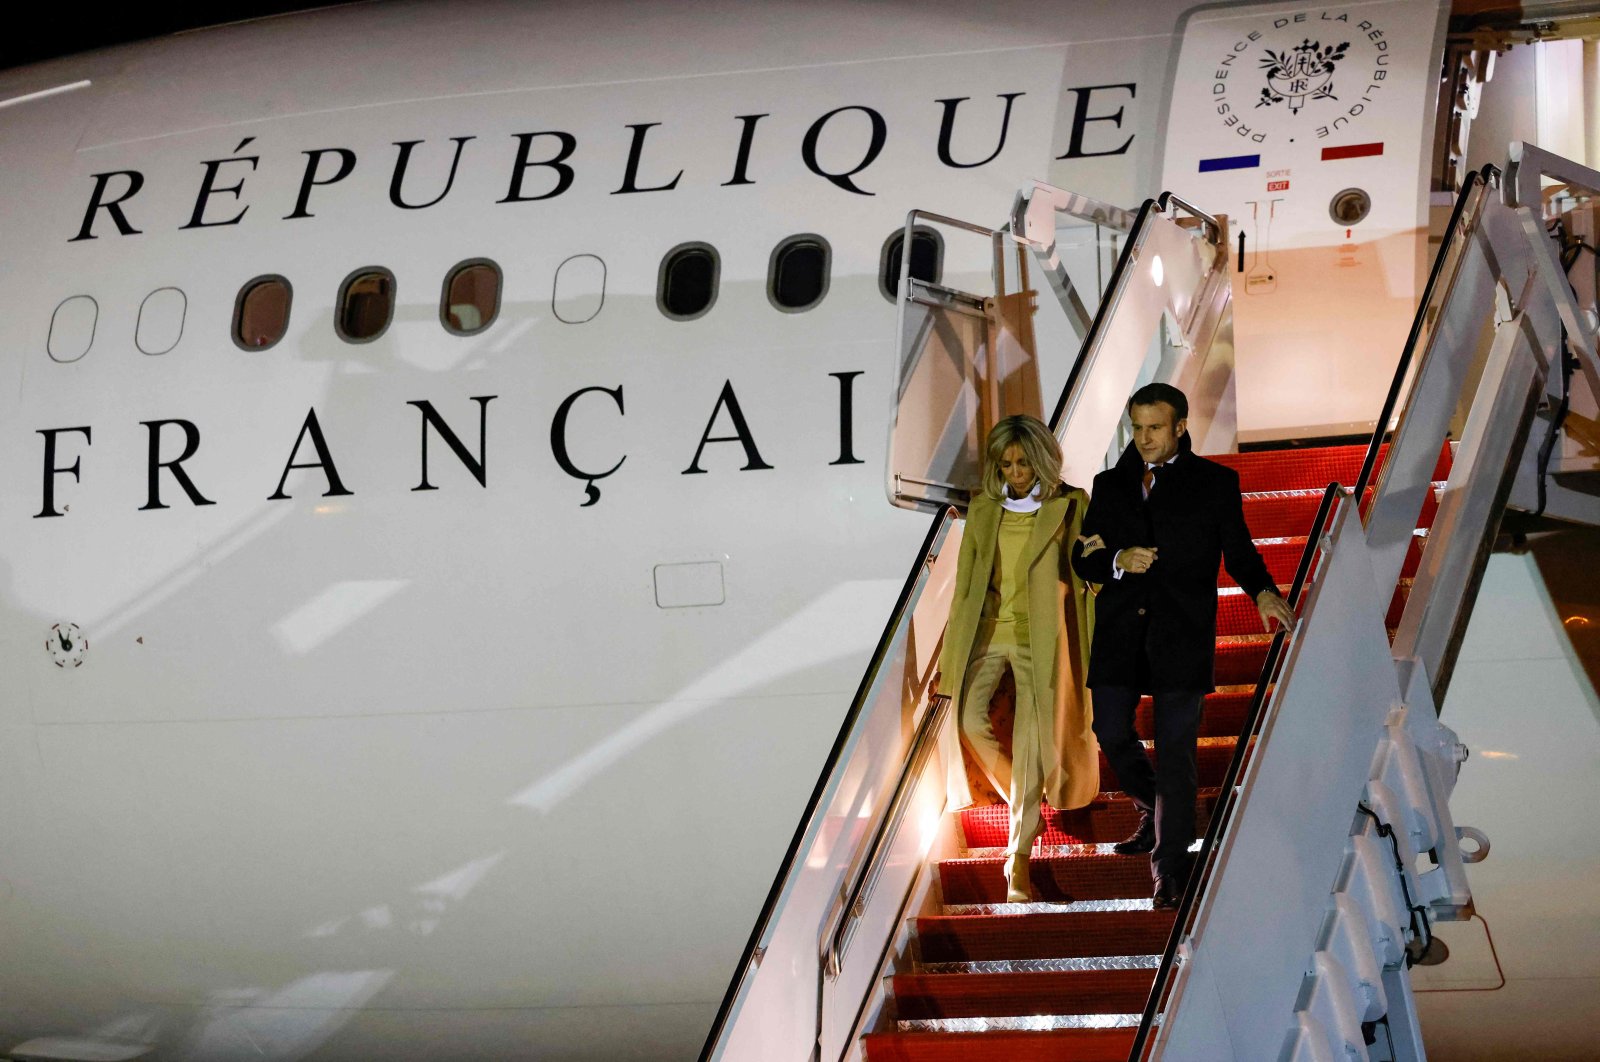 French President Emmanuel Macron and his wife Brigitte Macron disembark from their plane upon arrival at Joint Base Andrews in Maryland on Nov. 29, 2022. (AFP Photo)